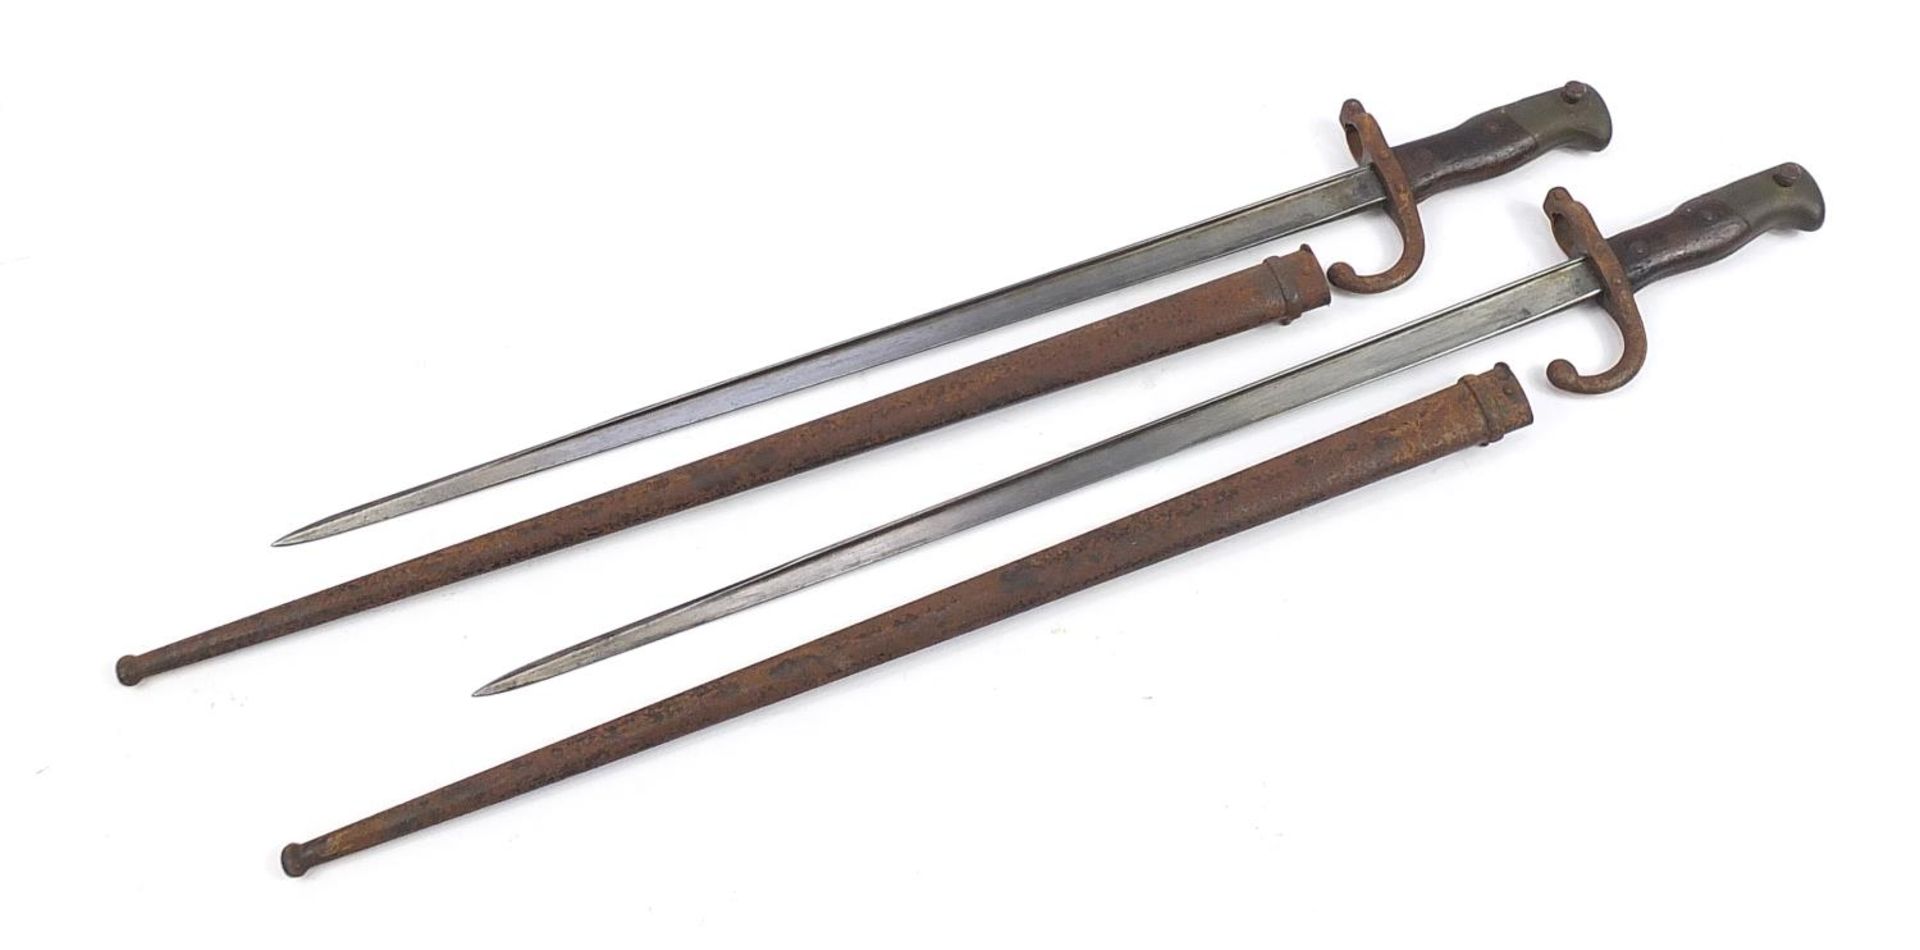 Pair of French military interest St Etienne bayonets with scabbards, each 66cm in length - Image 2 of 9